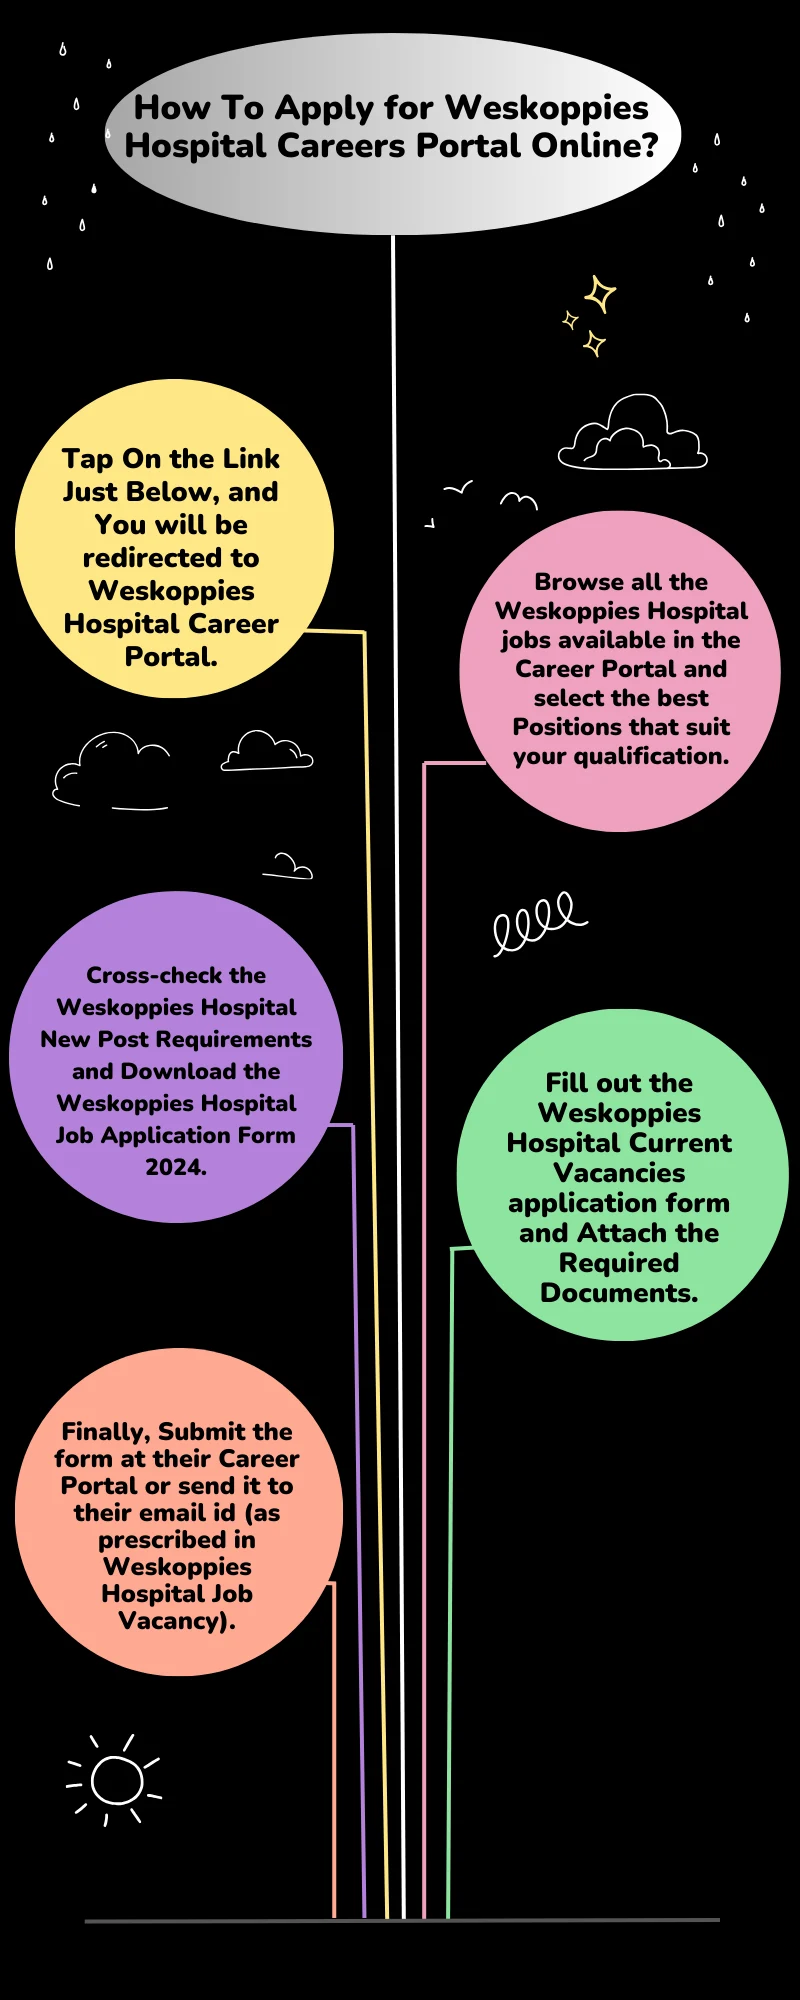 How To Apply for Weskoppies Hospital Careers Portal Online?